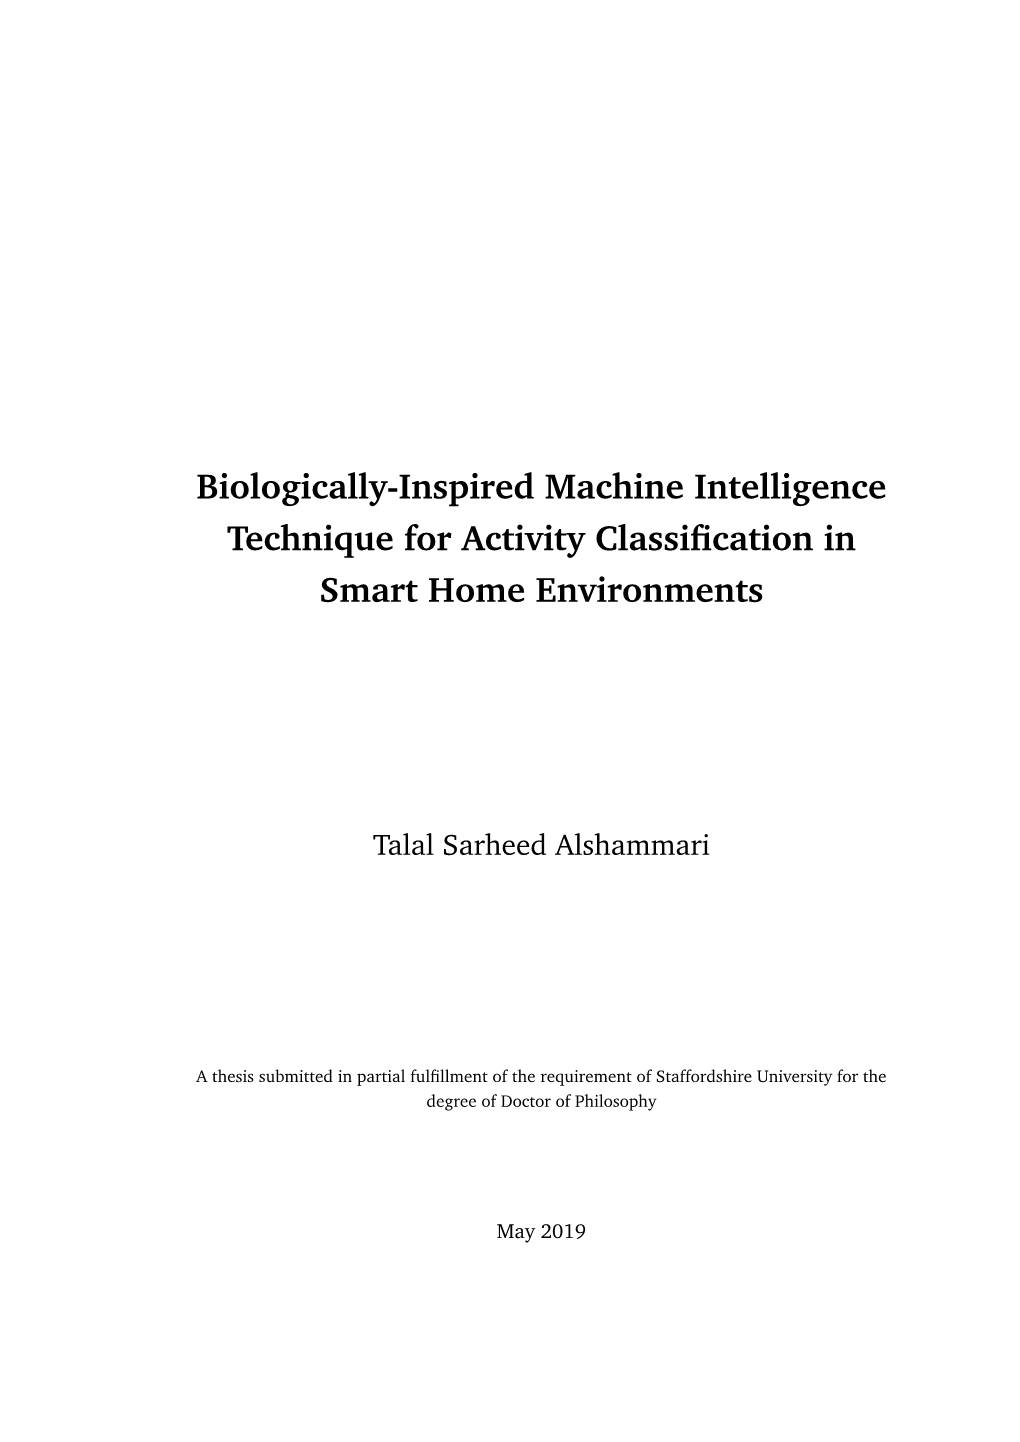 Biologically-Inspired Machine Intelligence Technique for Activity Classiﬁcation in Smart Home Environments